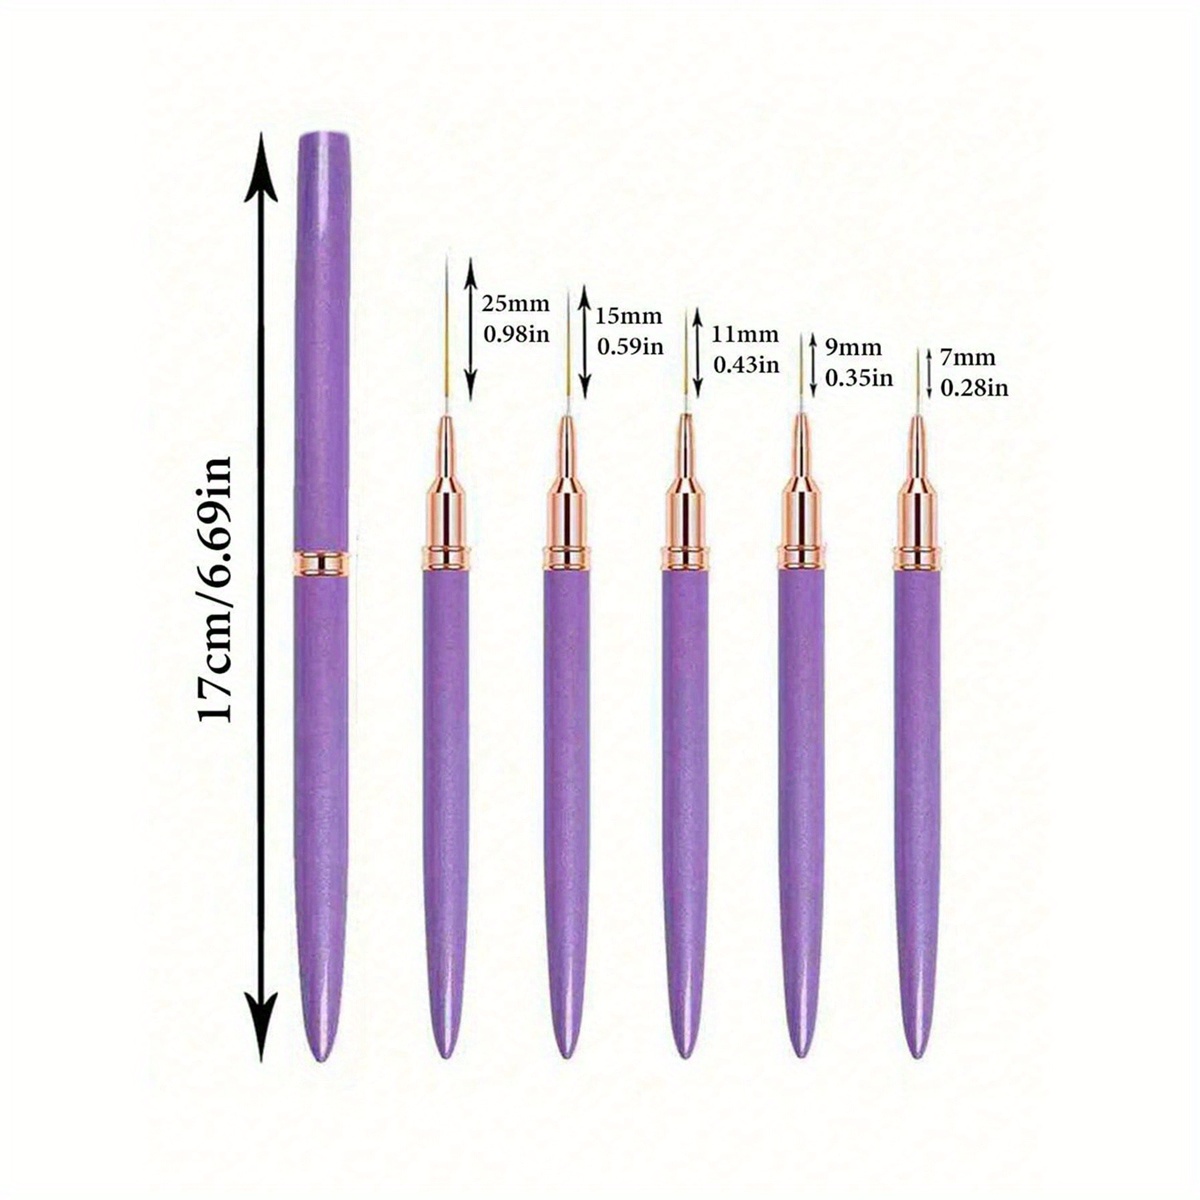 

Ultra-fine Nail Art Liner Brush Set - 5 Sizes (7/9/11/15/25mm) For Precision Manicure & Pedicure, Odorless Salon Quality Tools